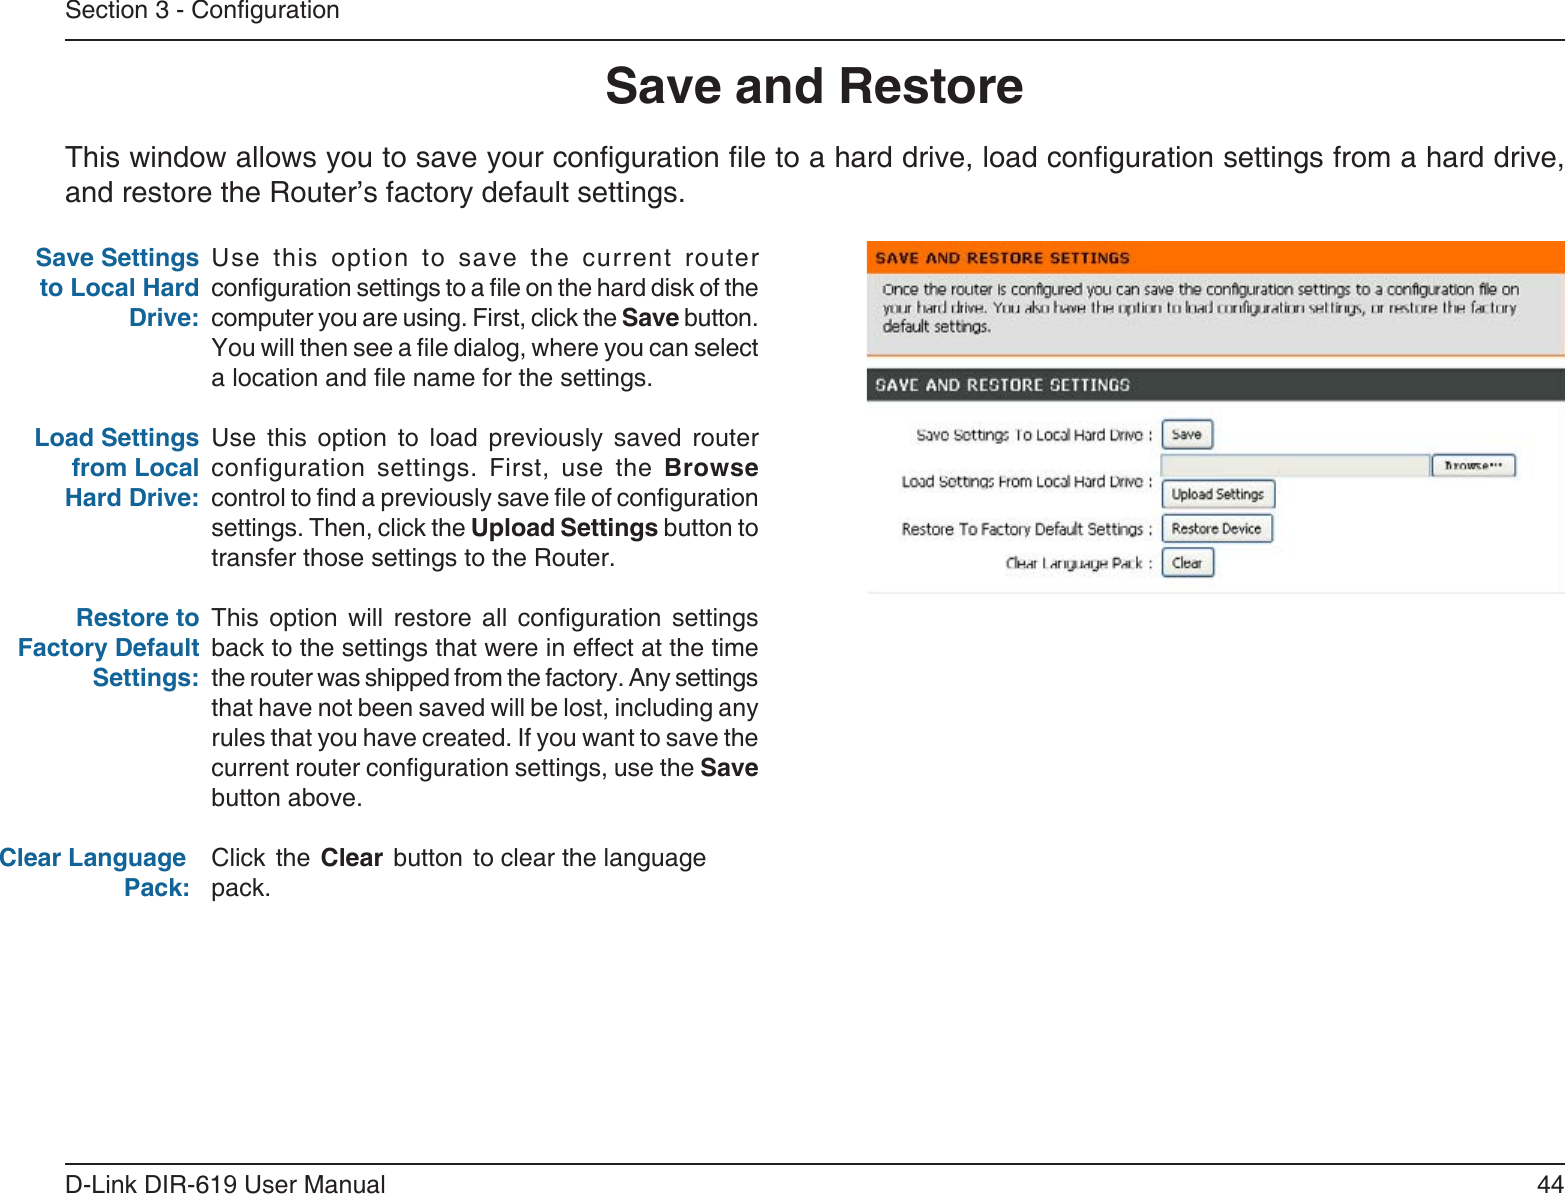 44D-Link DIR-619 User ManualSection 3 - CongurationSave and RestoreUse  this  option  to  save  the  current  routerconguration settings to a le on the hard disk of the computer you are using. First, click the Save button. You will then see a le dialog, where you can select a location and le name for the settings. Use  this  option  to  load  previously  saved  routerconfiguration settings. First, use the Browse control to nd a previously save le of conguration settings. Then, click the Upload Settings button totransfer those settings to the Router. This option will restore all conguration settings back to the settings that were in effect at the timethe router was shipped from the factory. Any settingsthat have not been saved will be lost, including any rules that you have created. If you want to save thecurrent router conguration settings, use the Save button above. Click  the  Clear  button  to clear the languagepack.Save Settings to Local Hard Drive:Load Settings from Local Hard Drive:Restore to Factory Default Settings:Clear Language                  Pack:This window allows you to save your conguration le to a hard drive, load conguration settings from a hard drive, and restore the Router’s factory default settings.